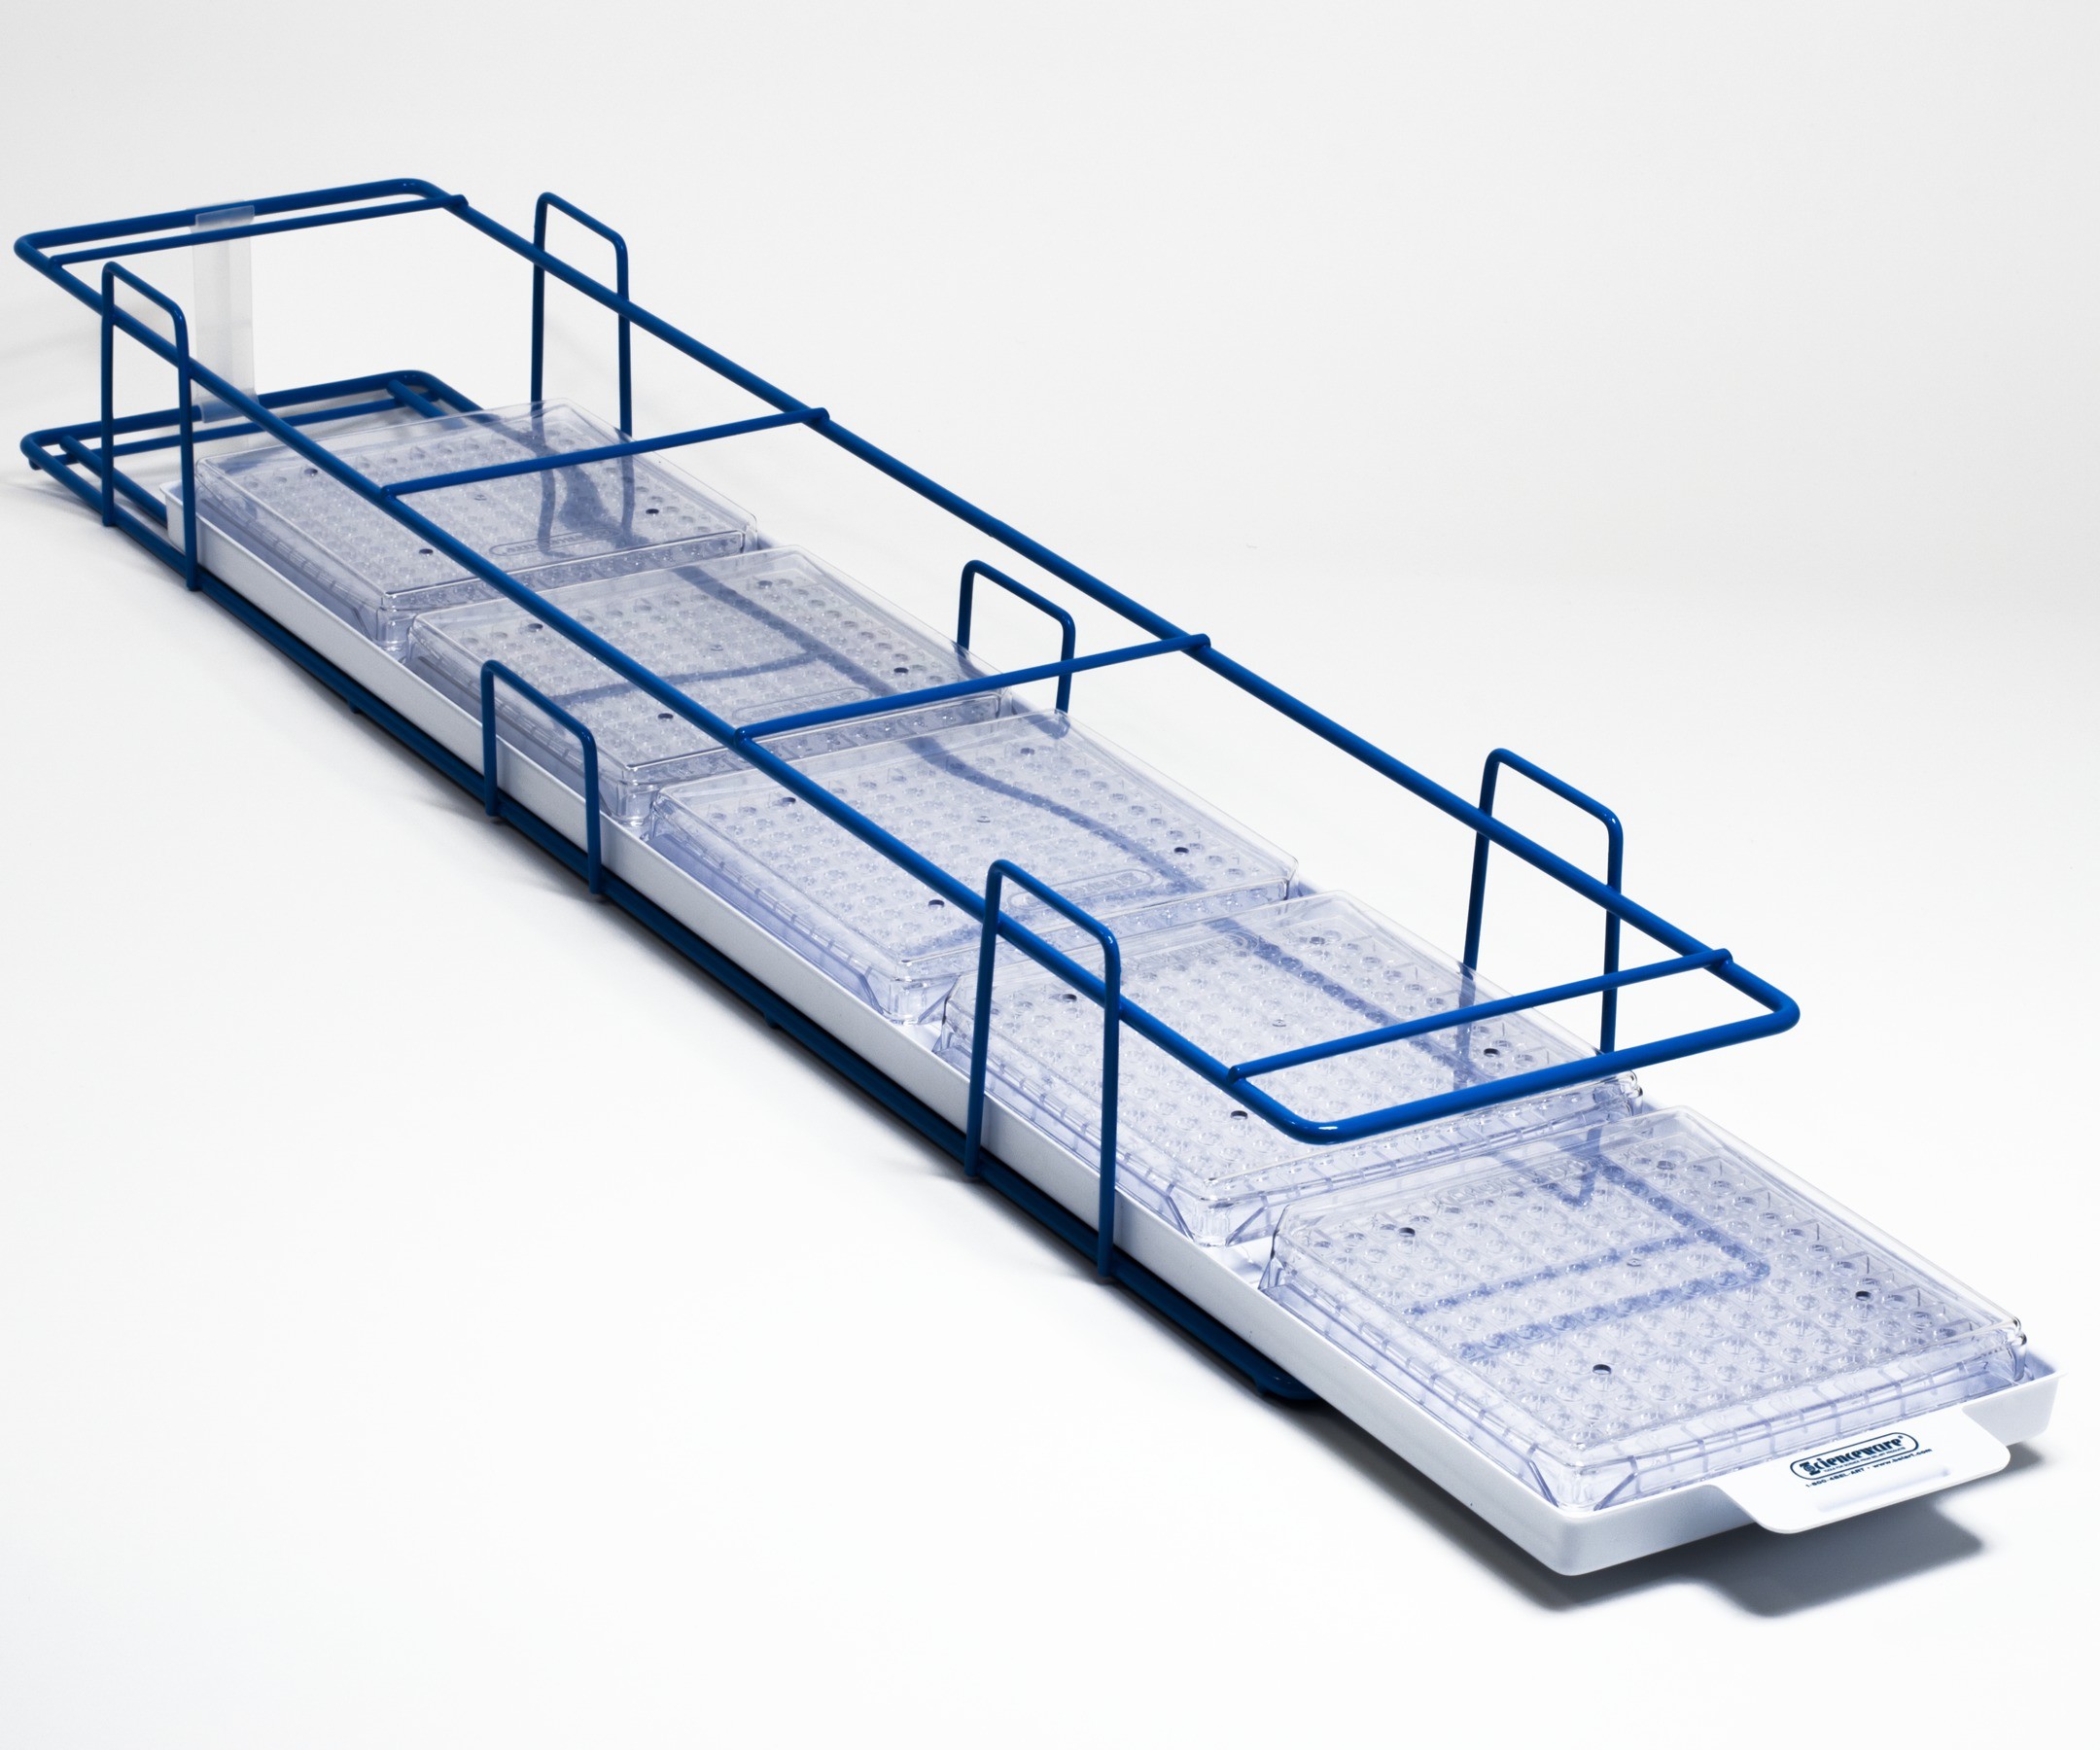 SP Bel-Art Modular Ultra-Low Freezer Rack with Drawer; 5 Places, 27 x 6 x 3½ in., Blue